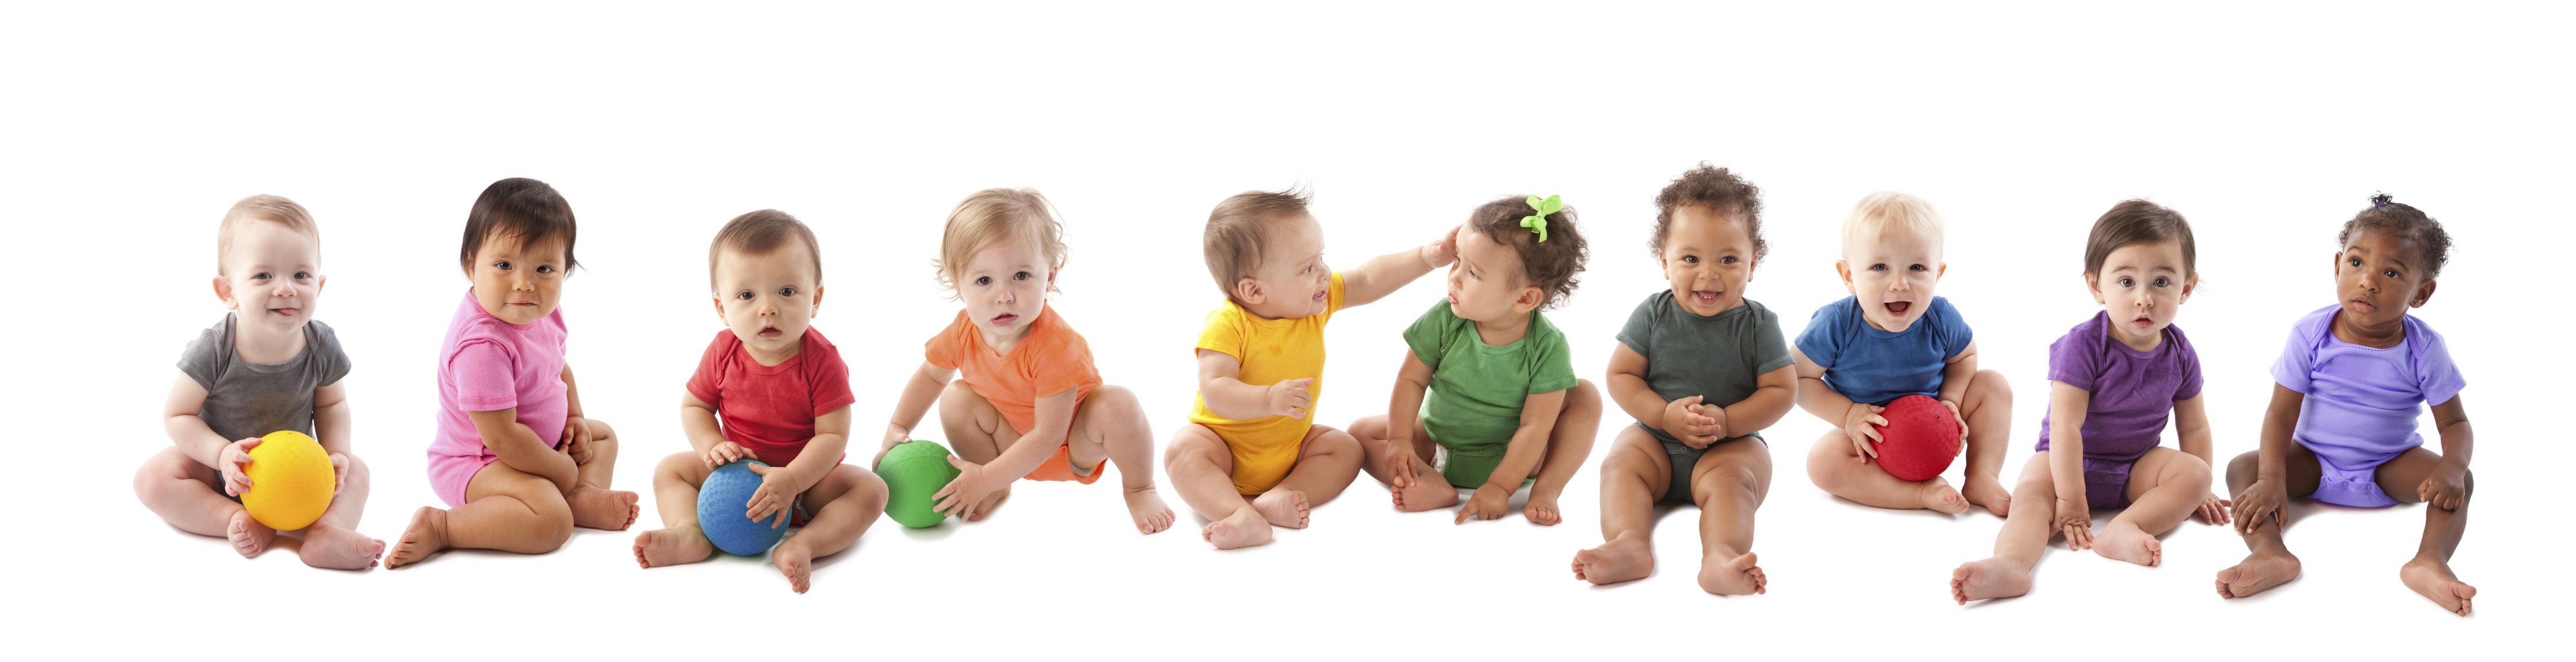 image of children in colourful clothes on a white background